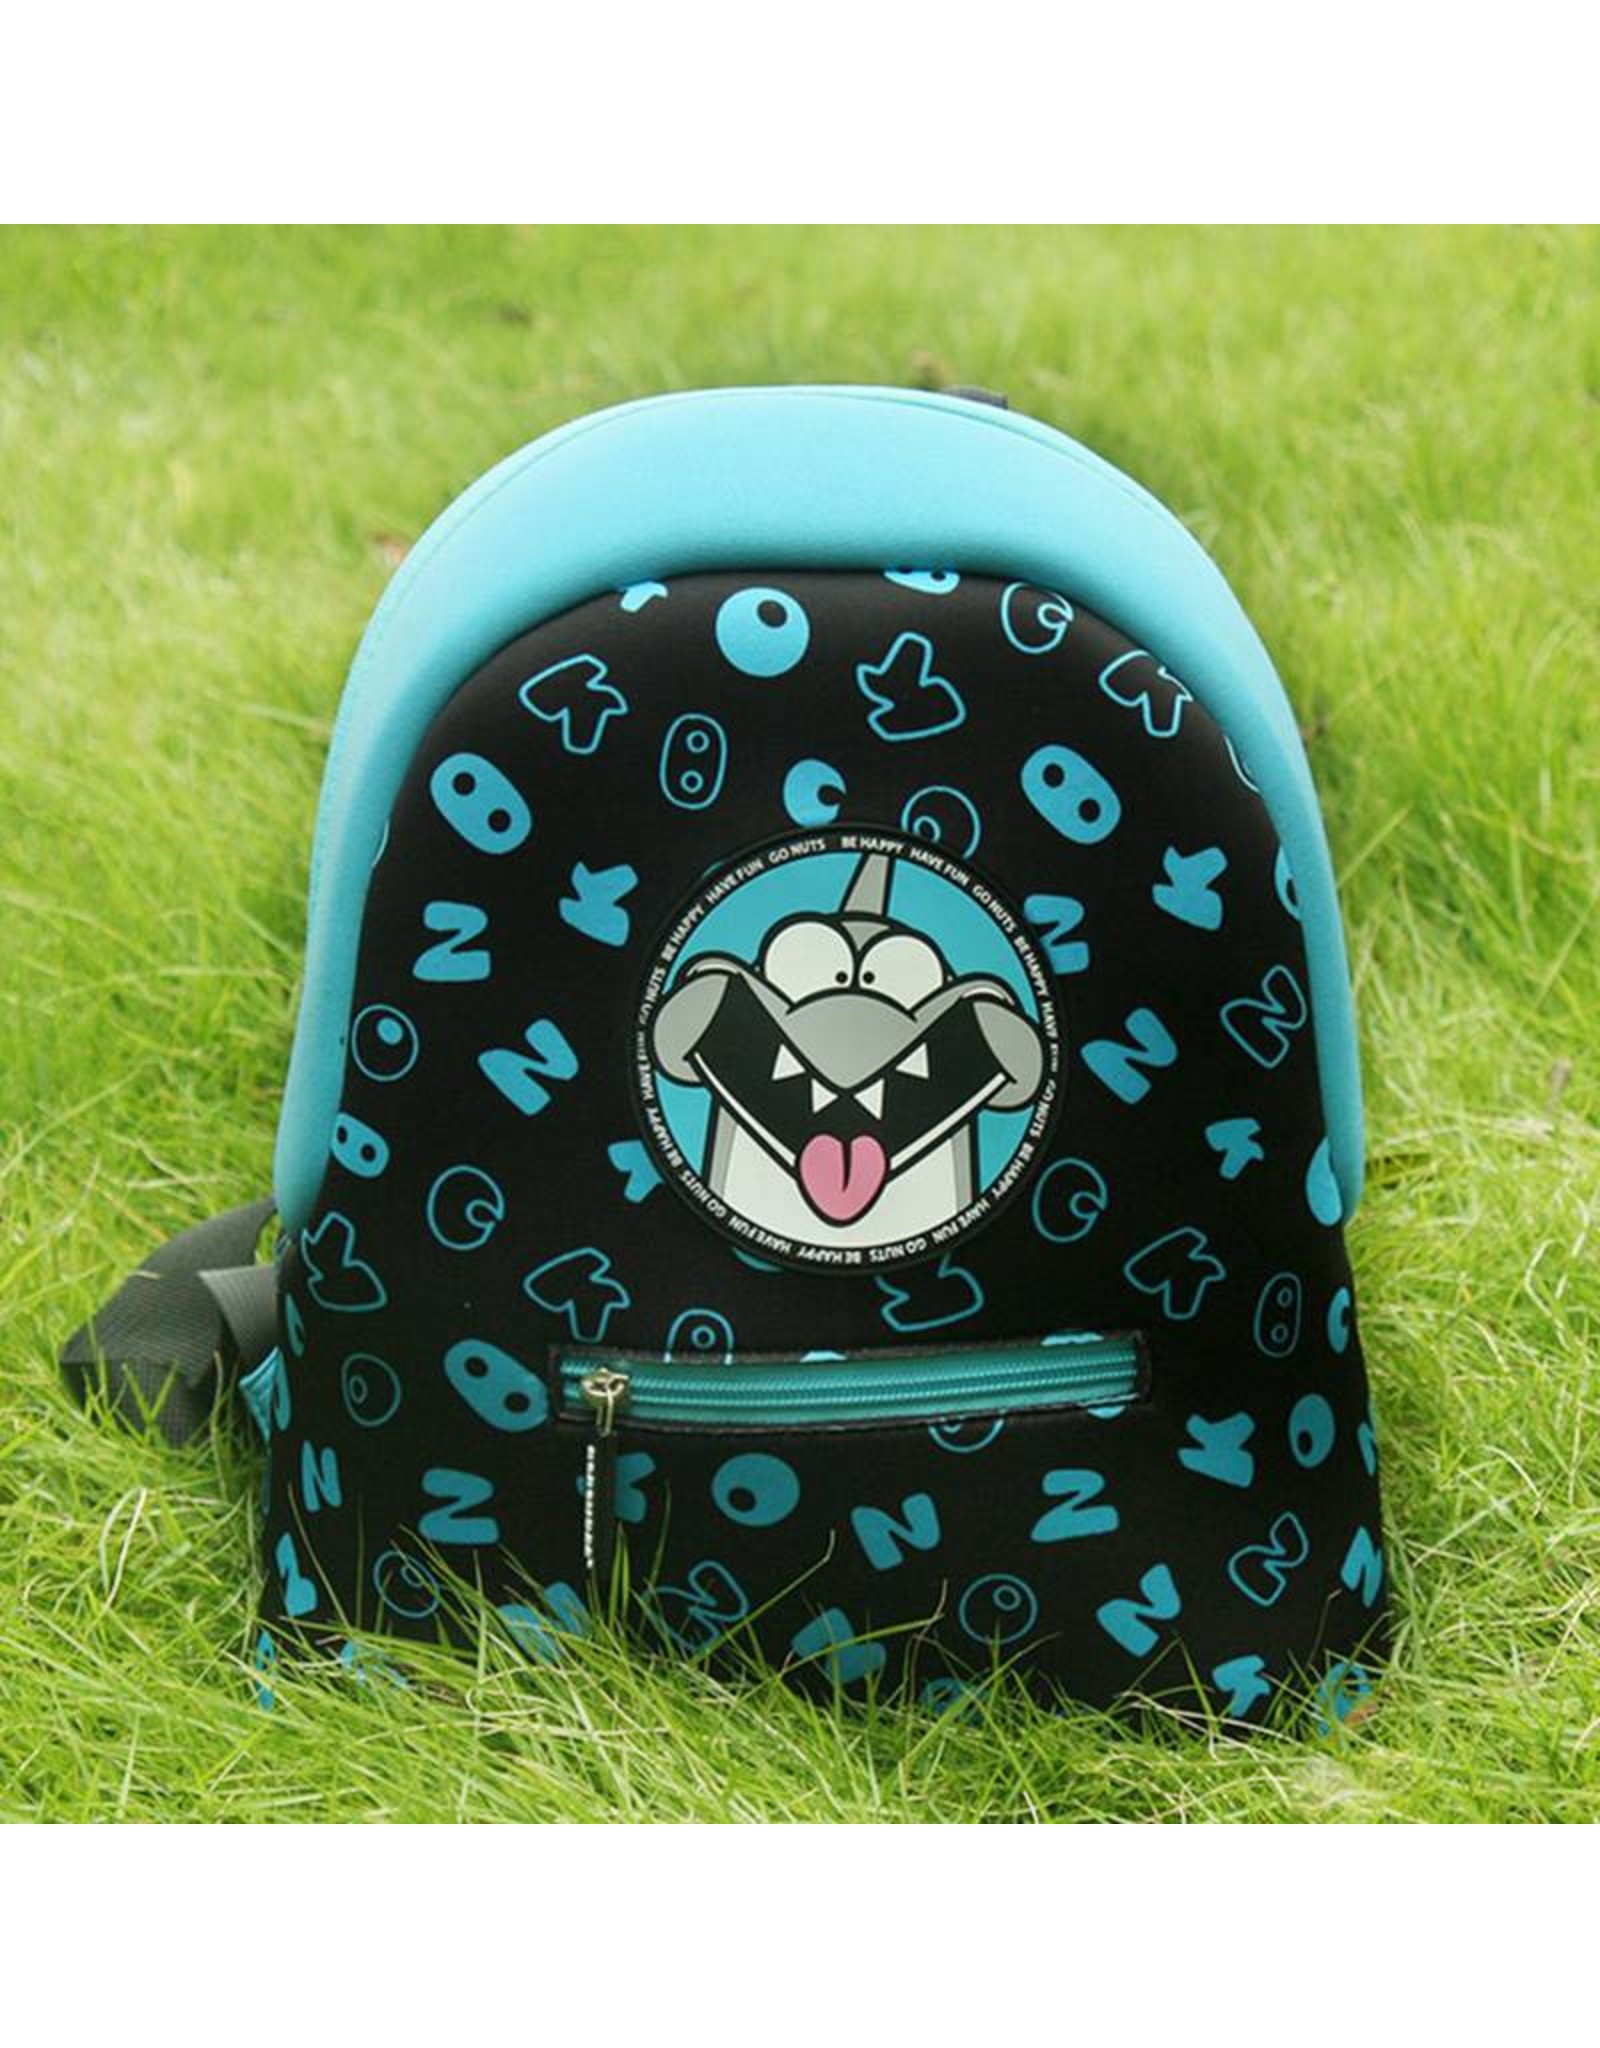 Childerns backpack Be Happy (Blue)